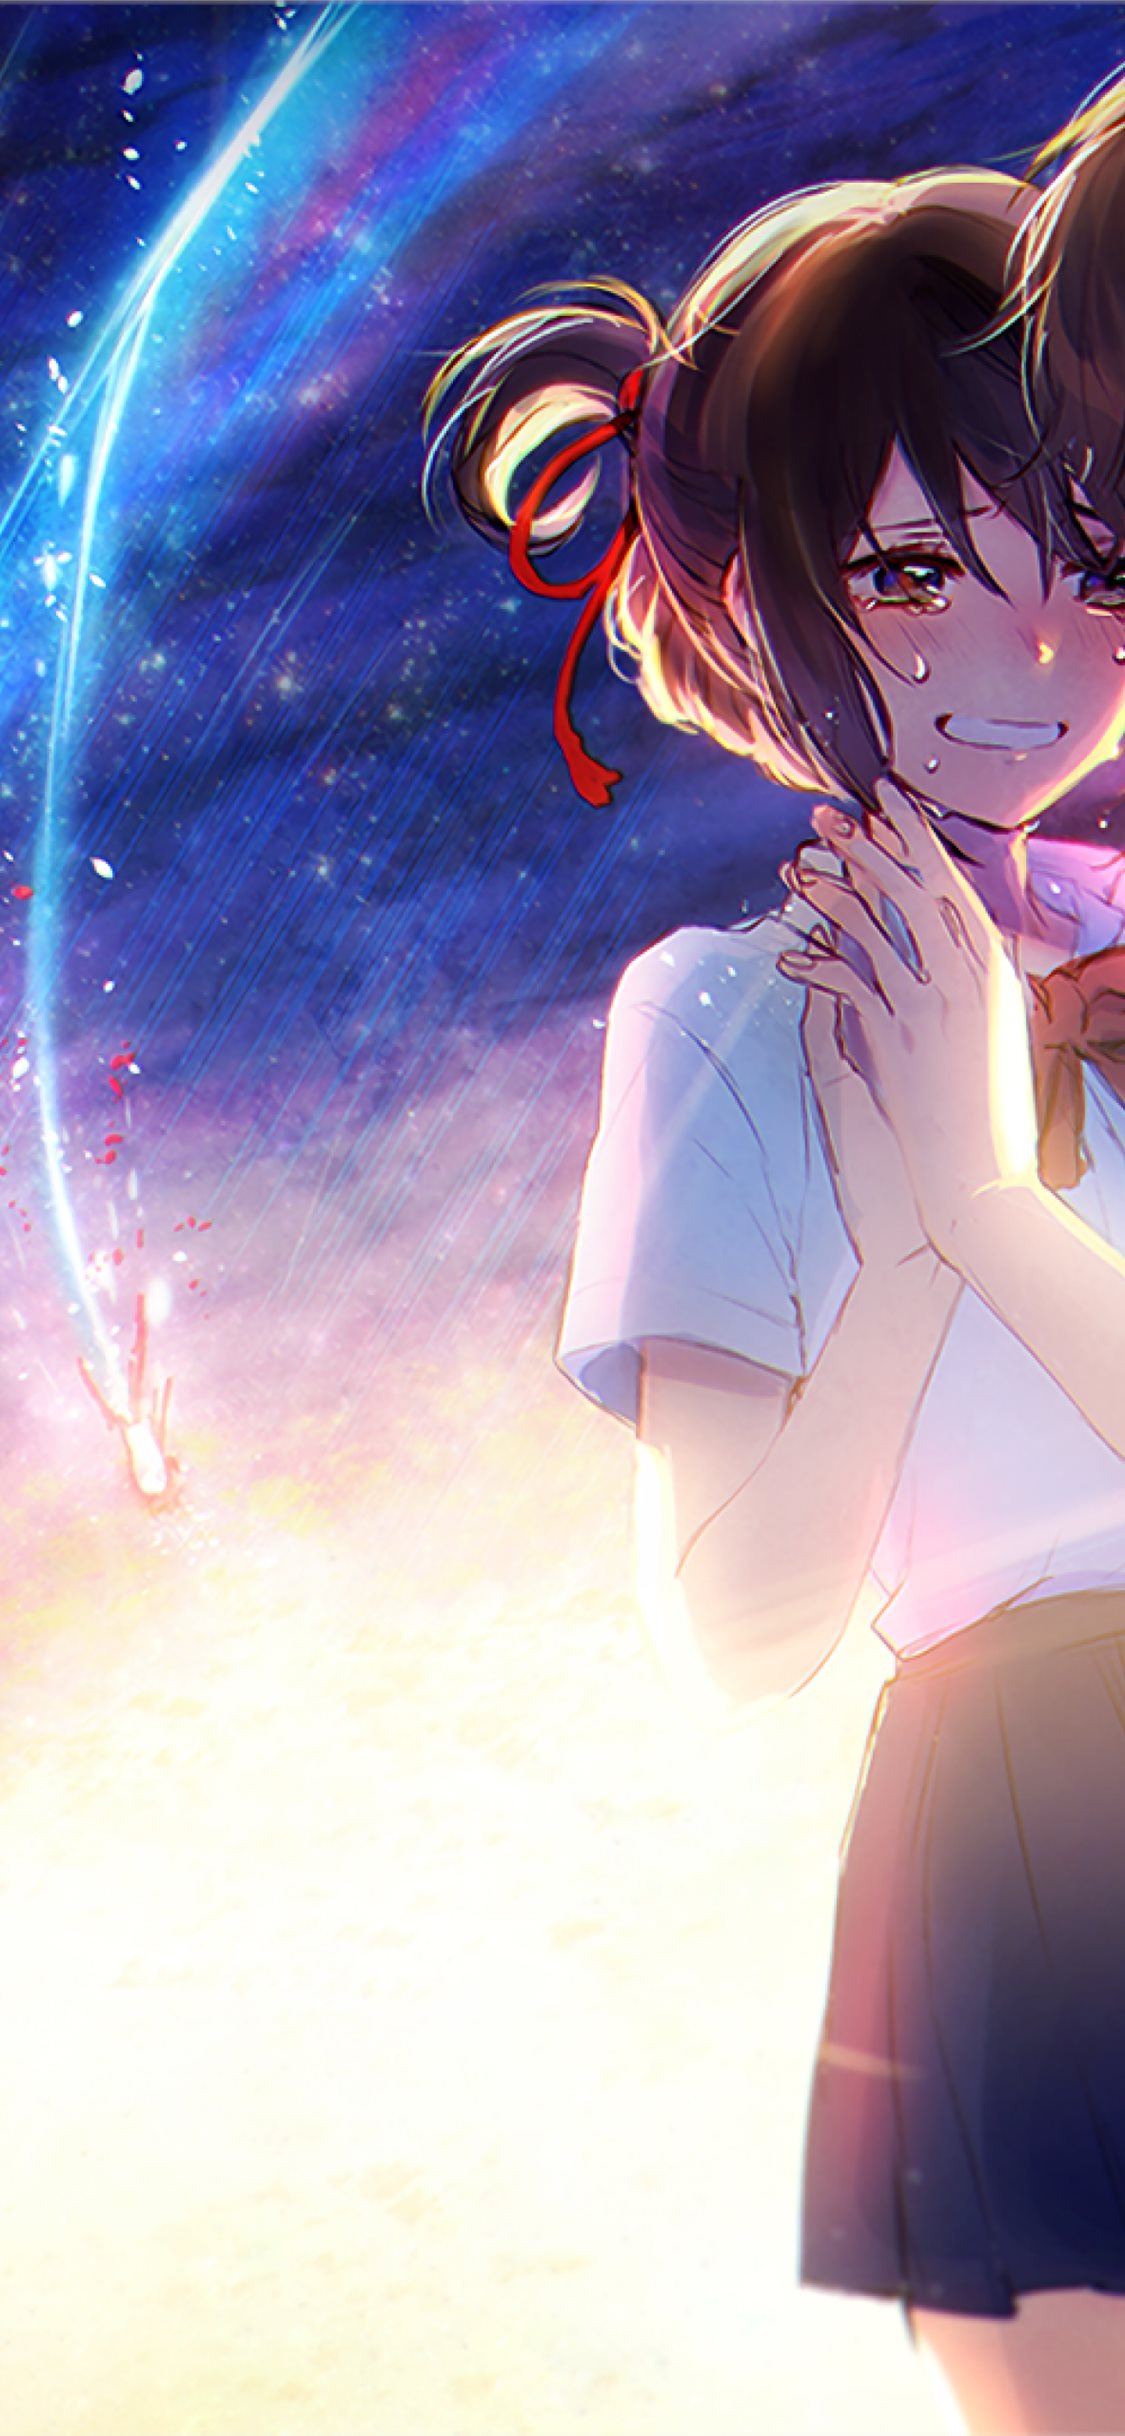 Your Name Couple Hd iPhone Wallpapers Free Download